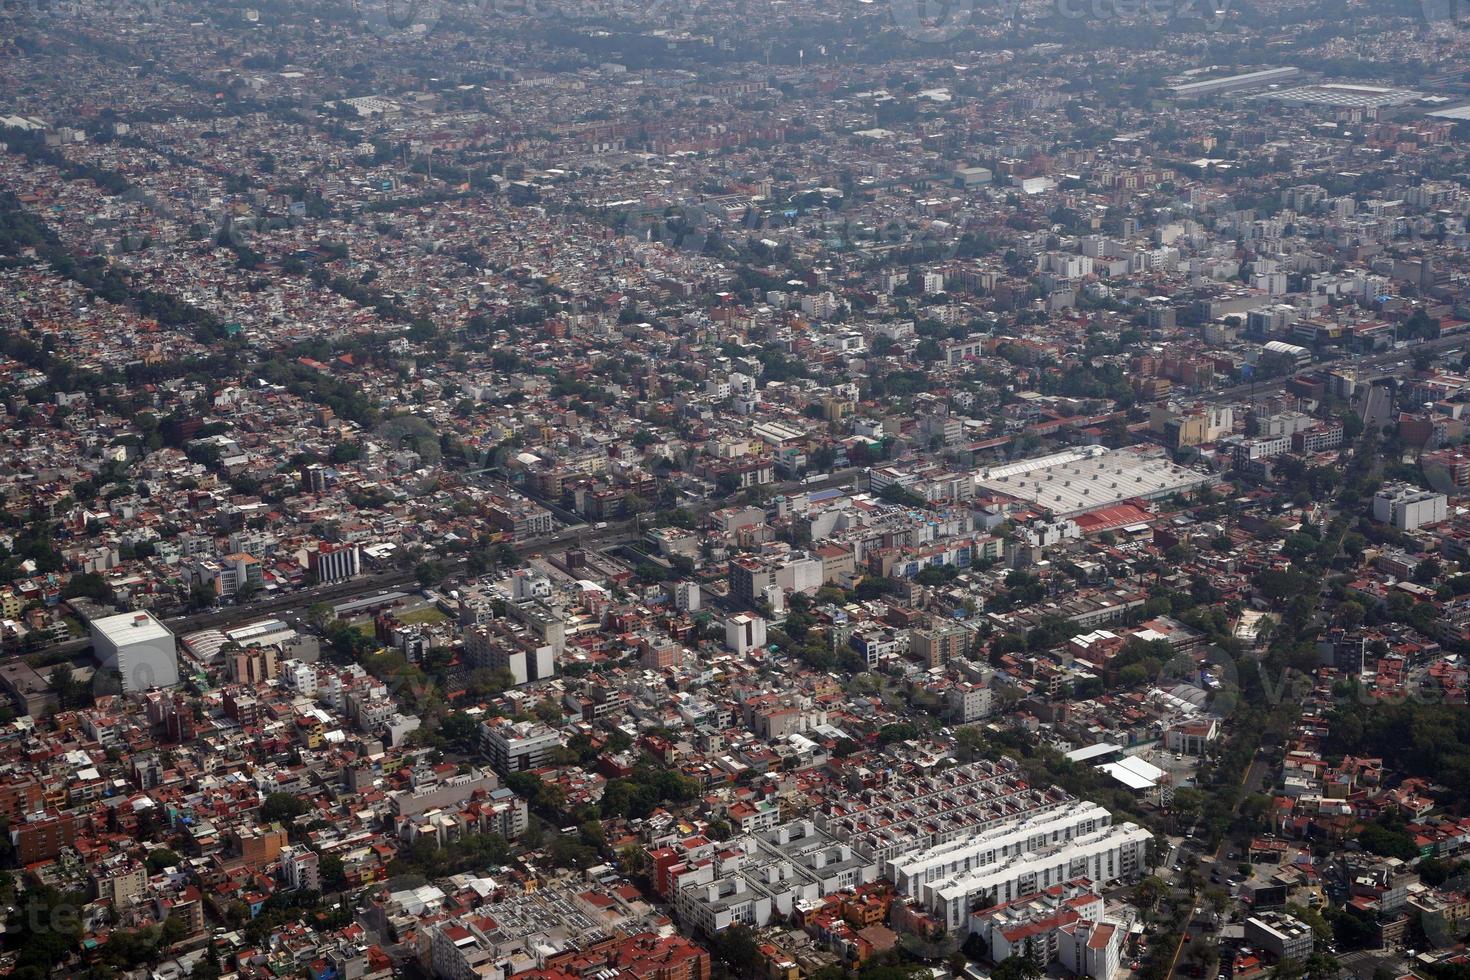 Mexico city aerial panorama landcape from airplane photo